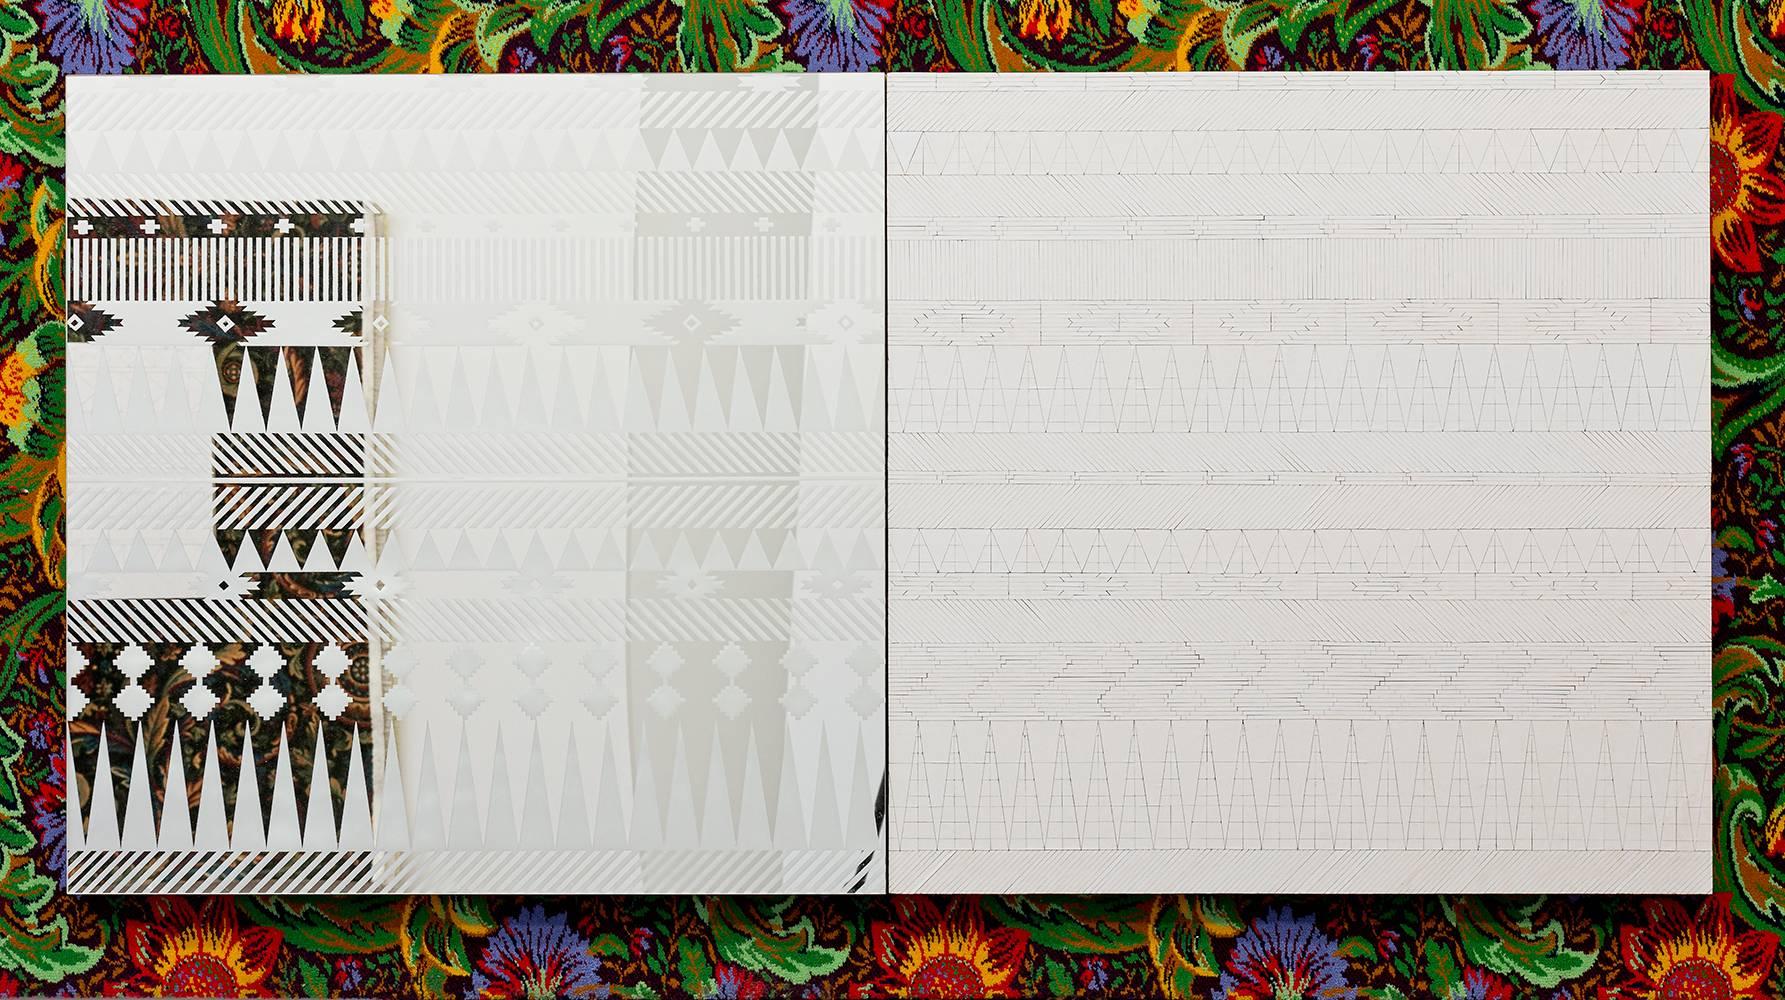 Smoke and Mirrors, 2013
Used playing cards from the Ho-Chunk Nation, mirror, paint on 2 panels
102 x 203 cm / 40 x 80 in

Ghost of a Dream is the collaborative practice of artists Adam Eckstrom and Lauren Was. Eckstrom (b. 1974, Twin Cities, MN)